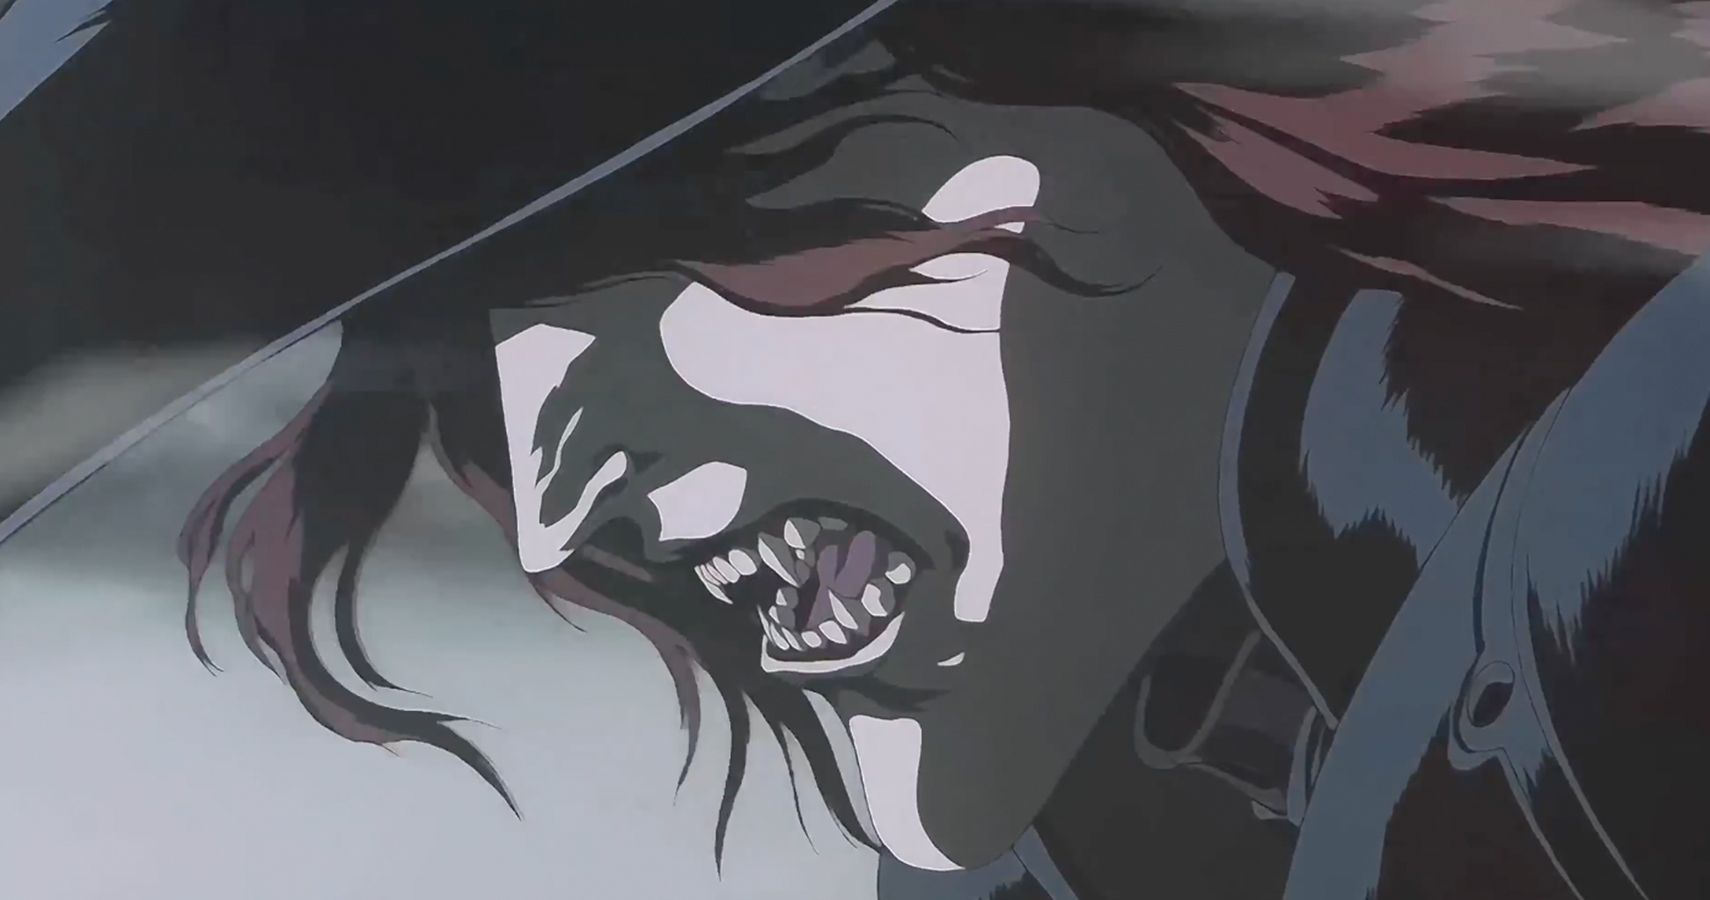 Characters appearing in Vampire Hunter D: Bloodlust Anime